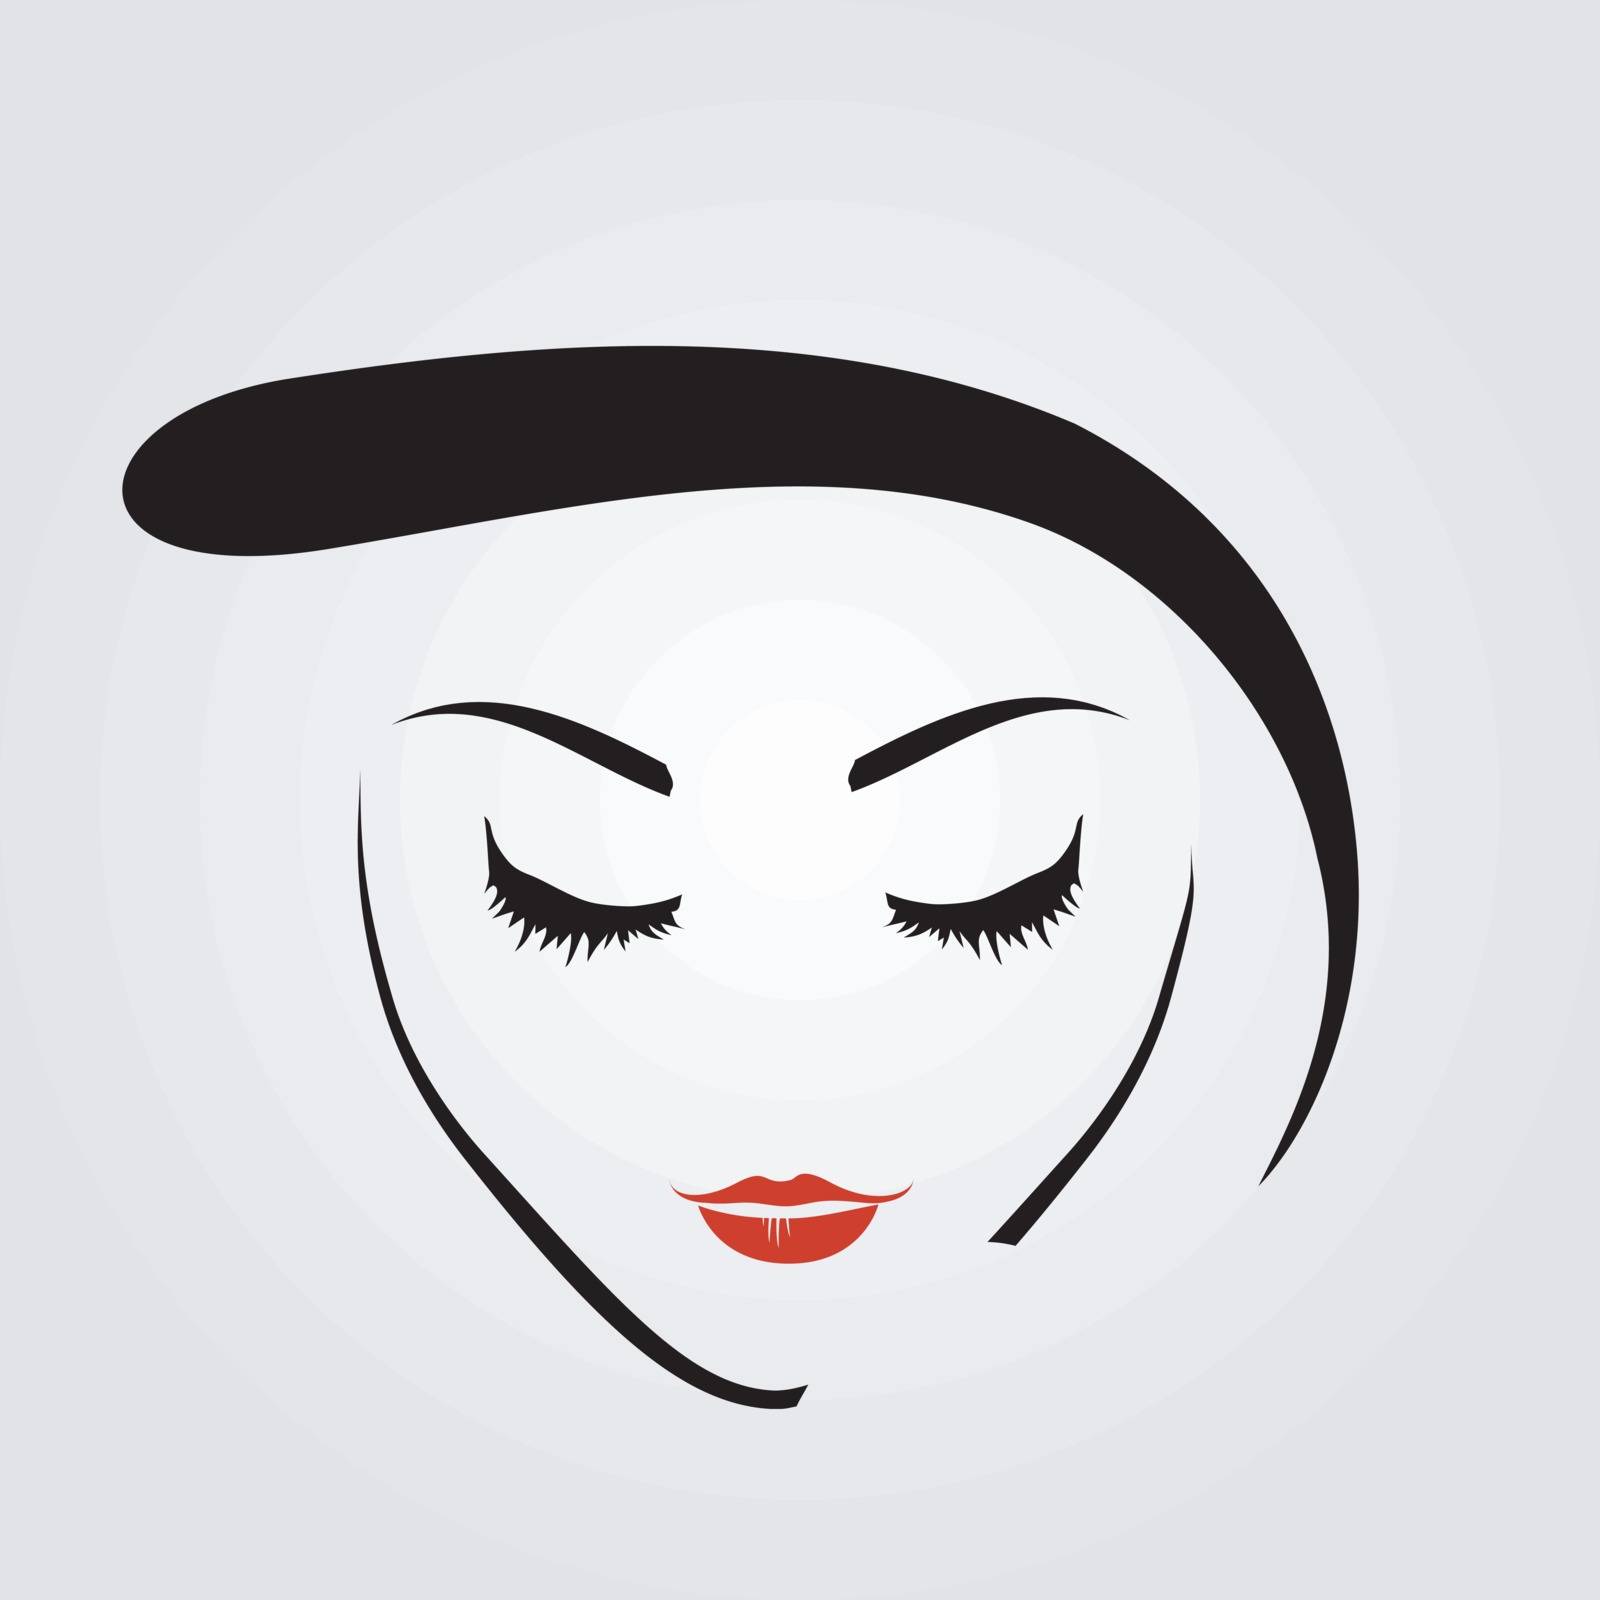 Graphic of a woman with vintage hairstyle and make up